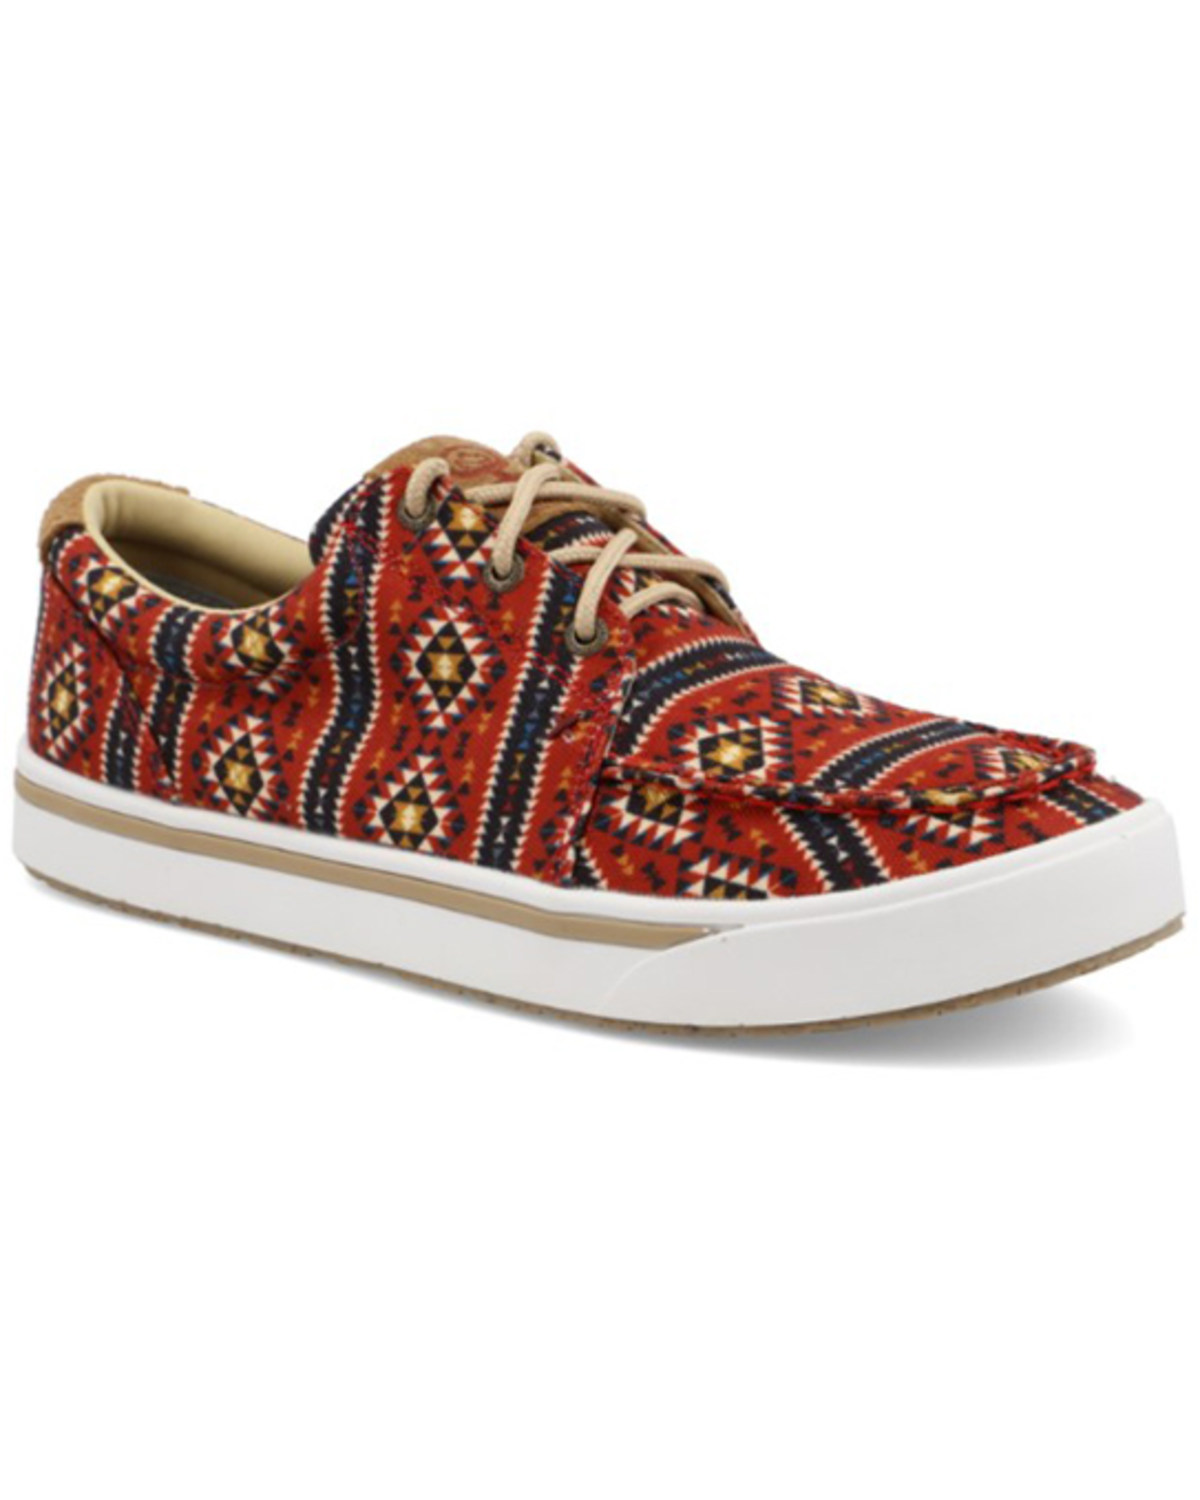 Hooey by Twisted X Men's Southwestern Print Causal Lopers